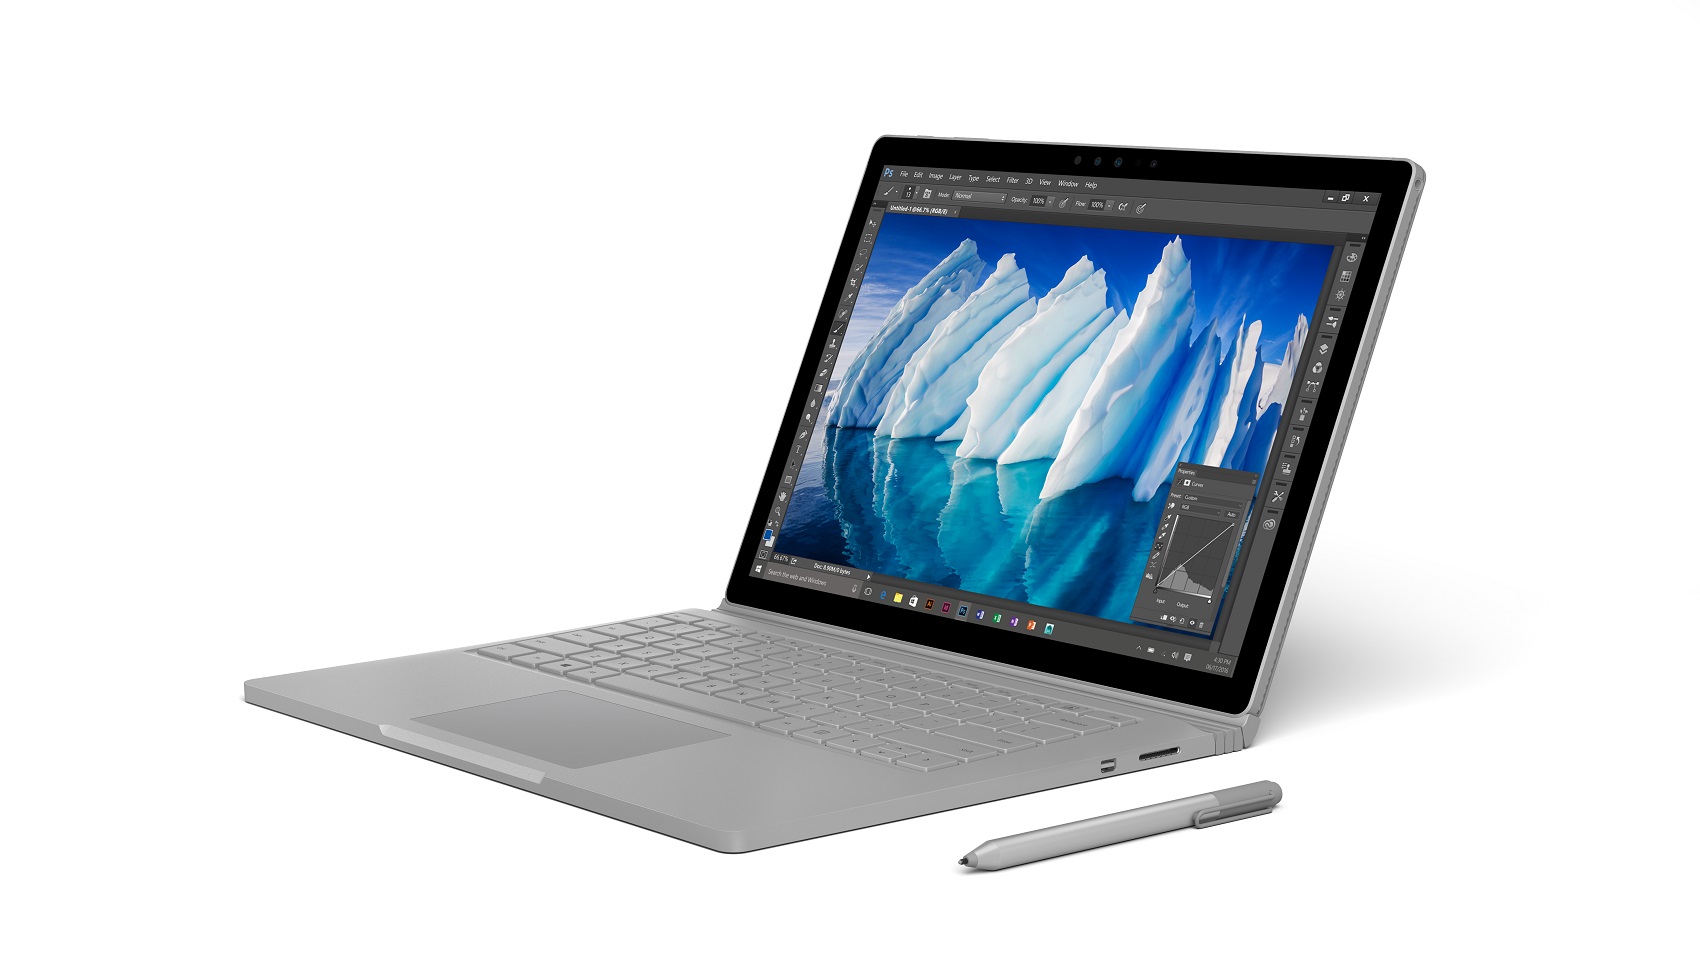 The most powerful Surface Book yet